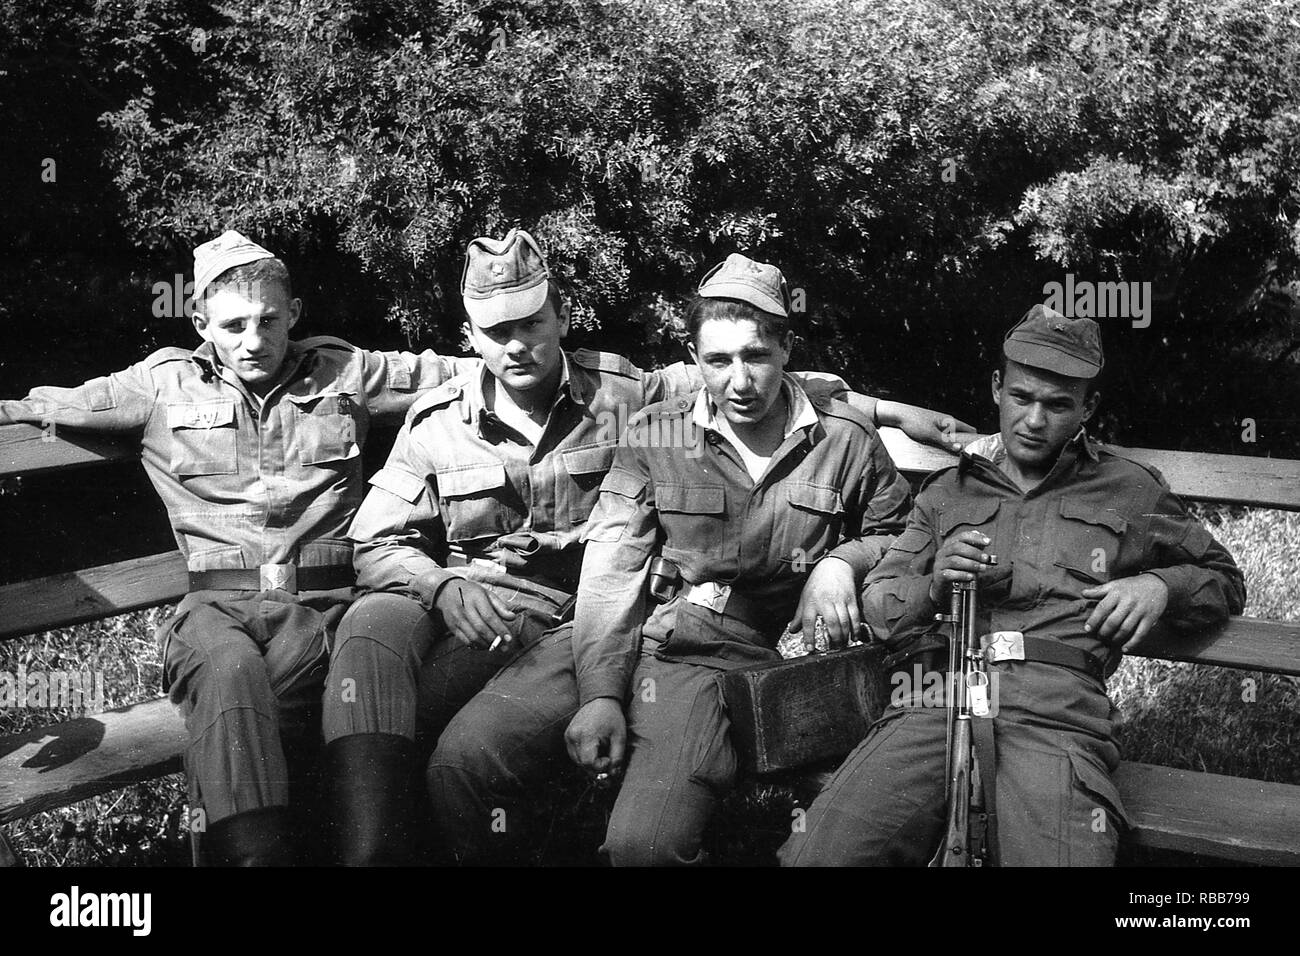 MOSCOW REGION, RUSSIA - CIRCA 1992: Soldiers of the Russian army are sitting on a wooden bench. Film scan. Large grain. Stock Photo